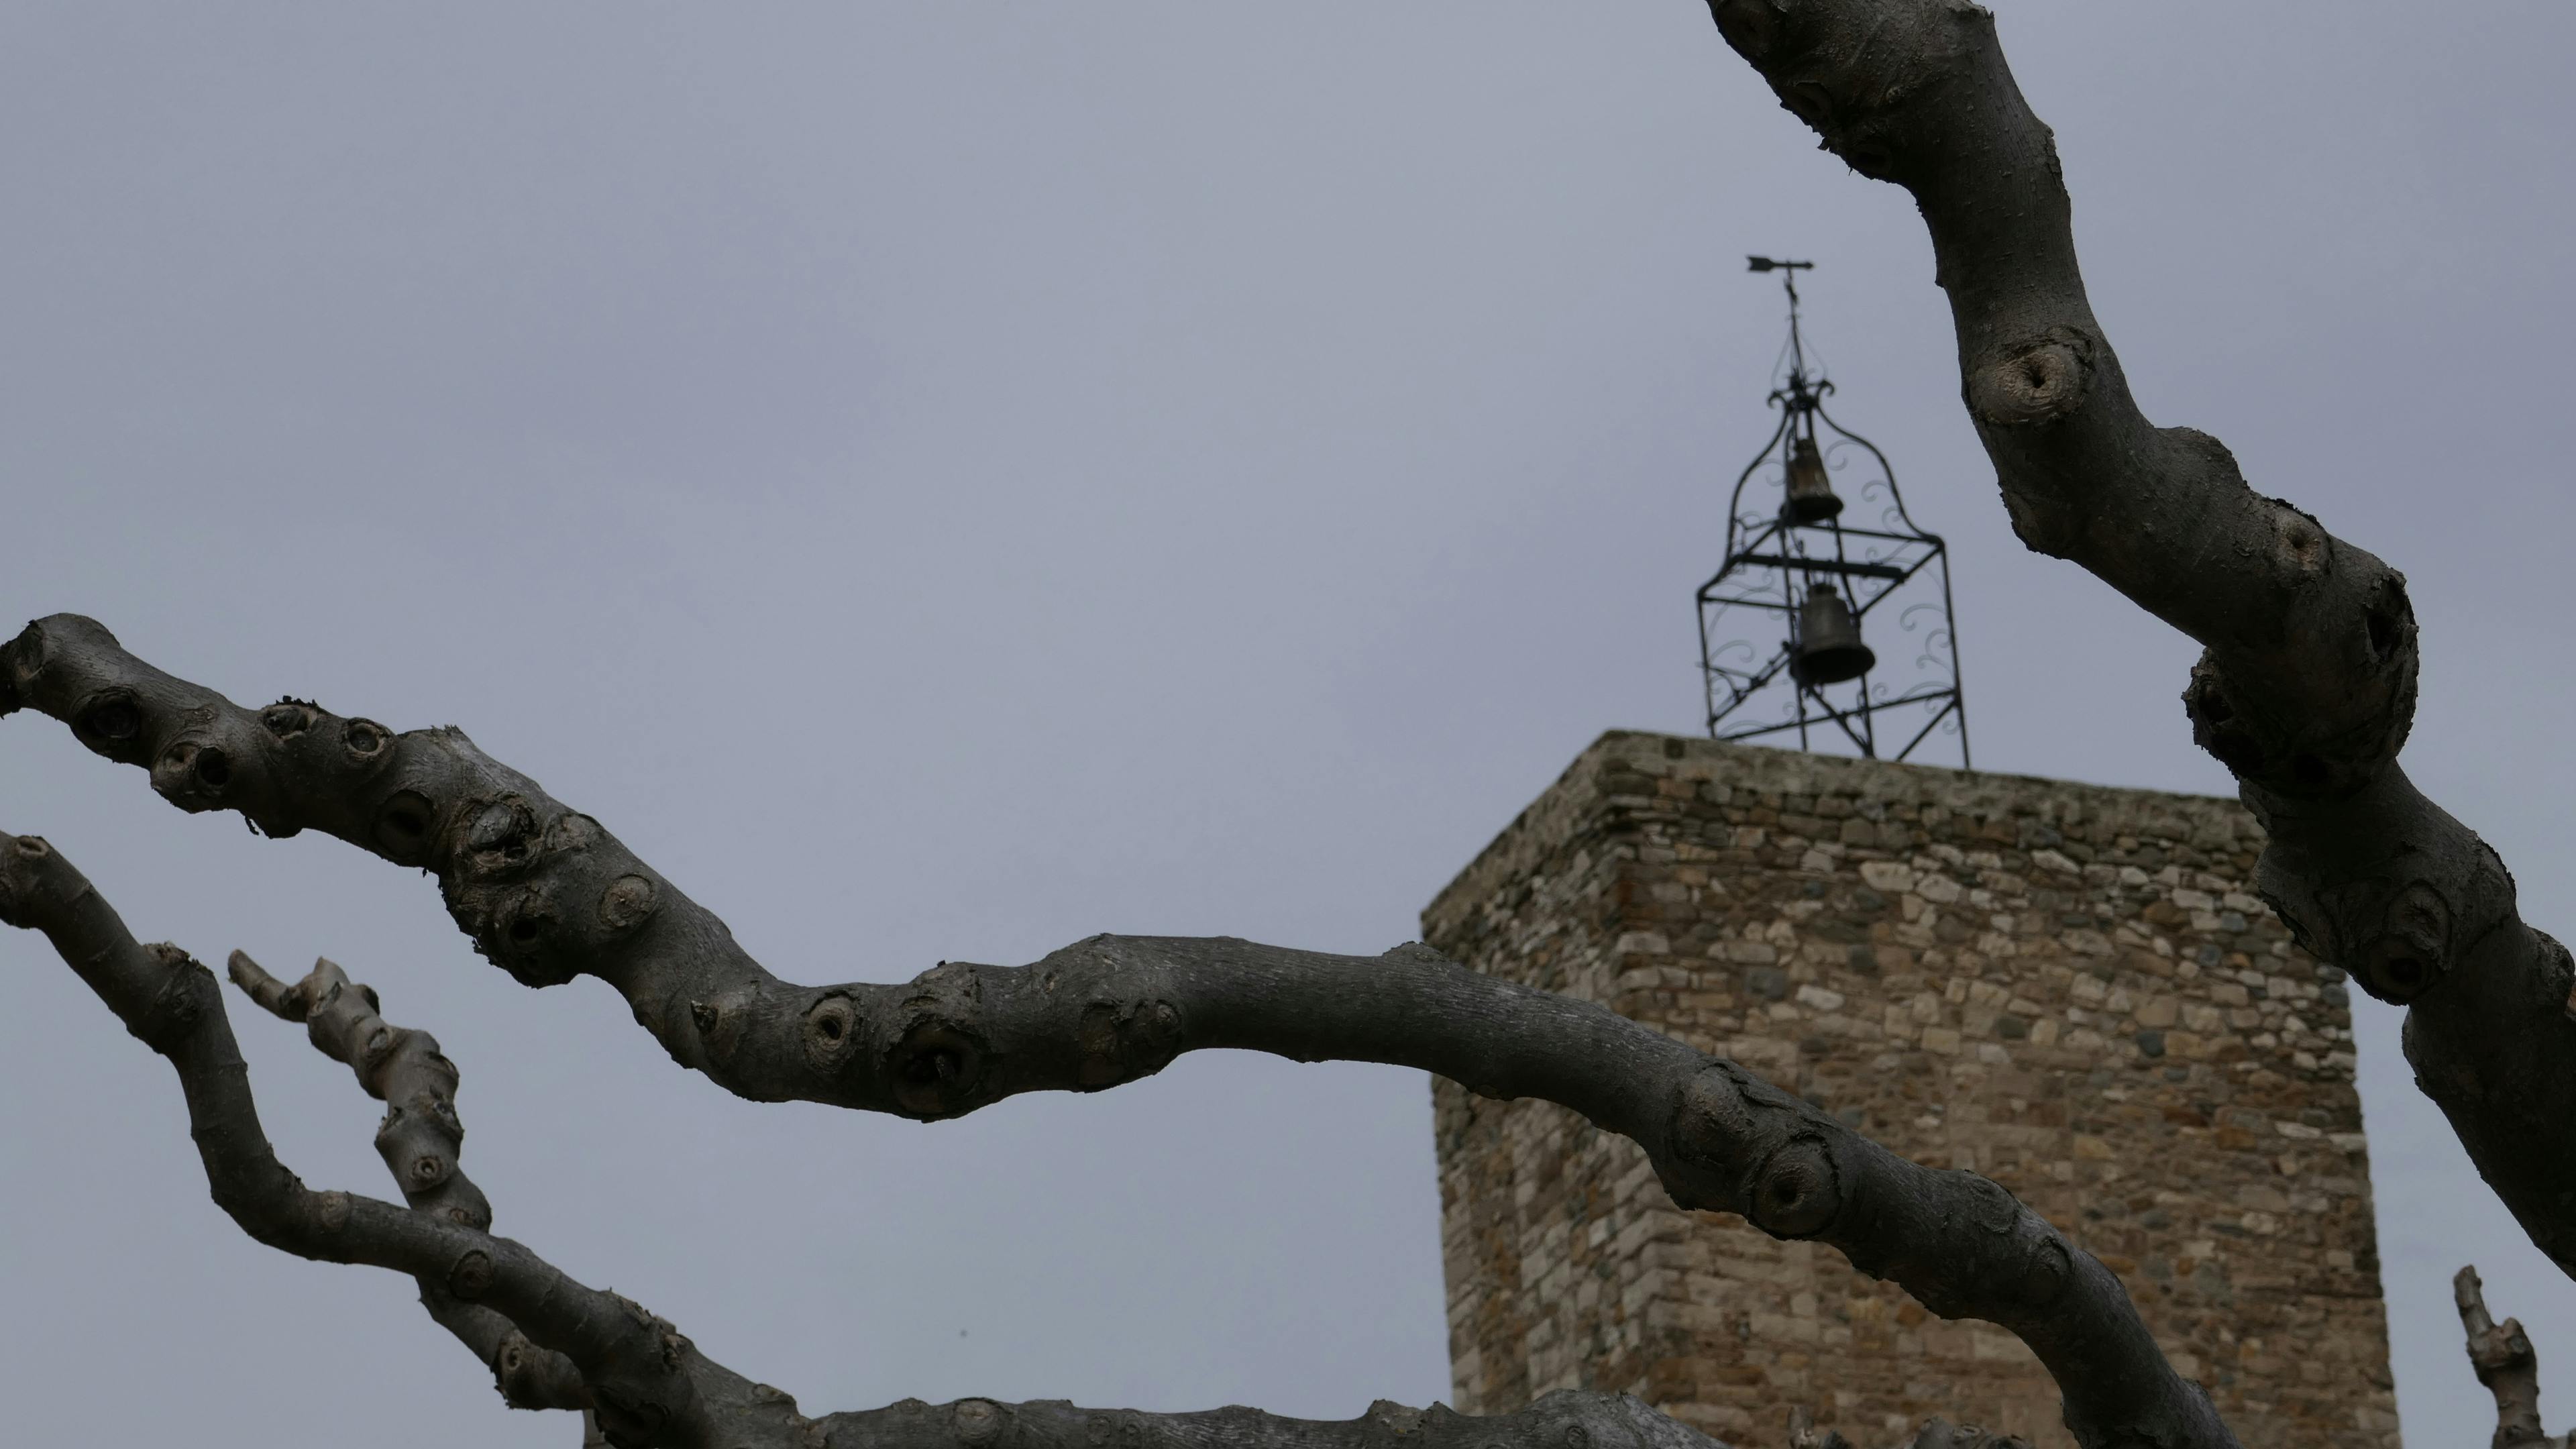 Free stock photo of like arms, old church top, tree branches